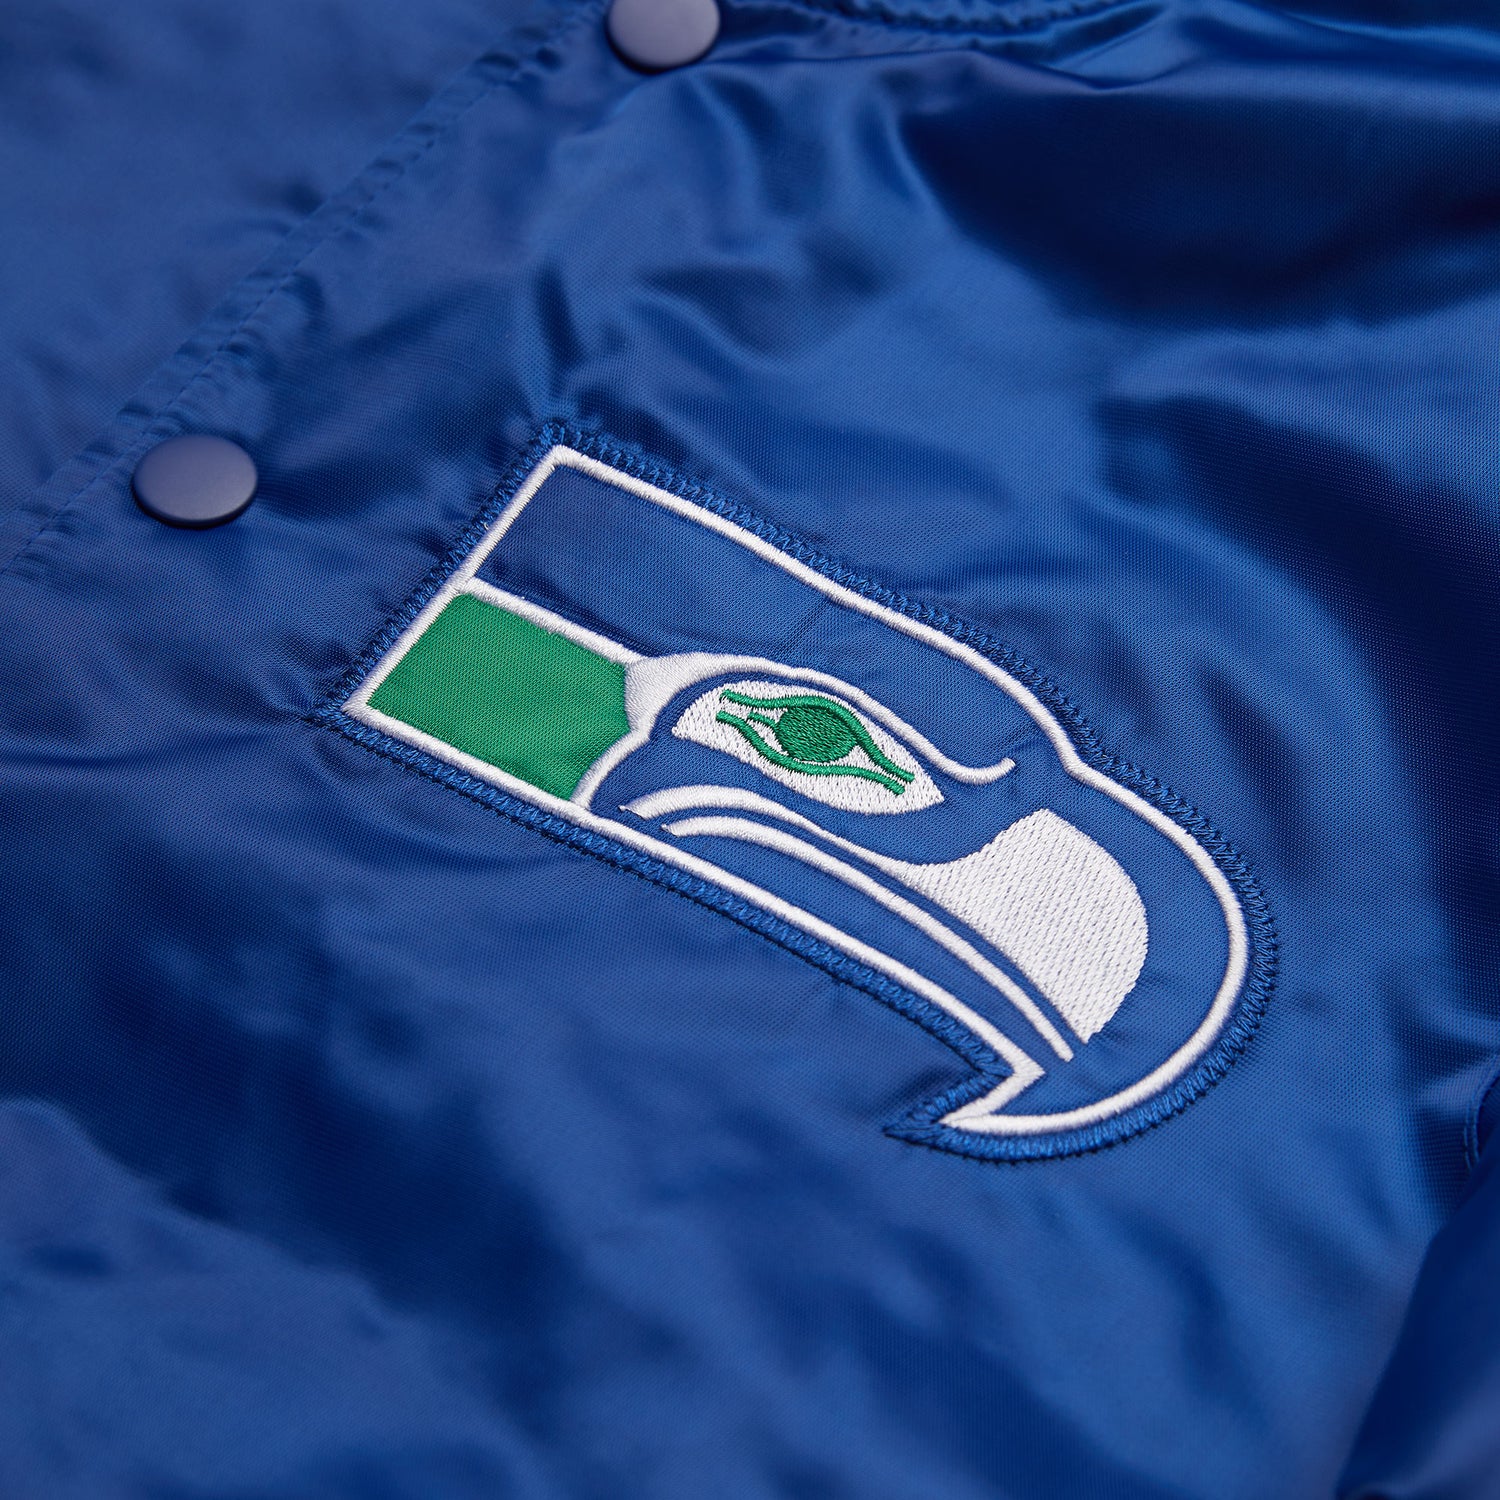 Homage x Starter Seattle Seahawks Pullover Jacket from Homage. | Officially Licensed Vintage NFL Apparel from Homage Pro Shop.